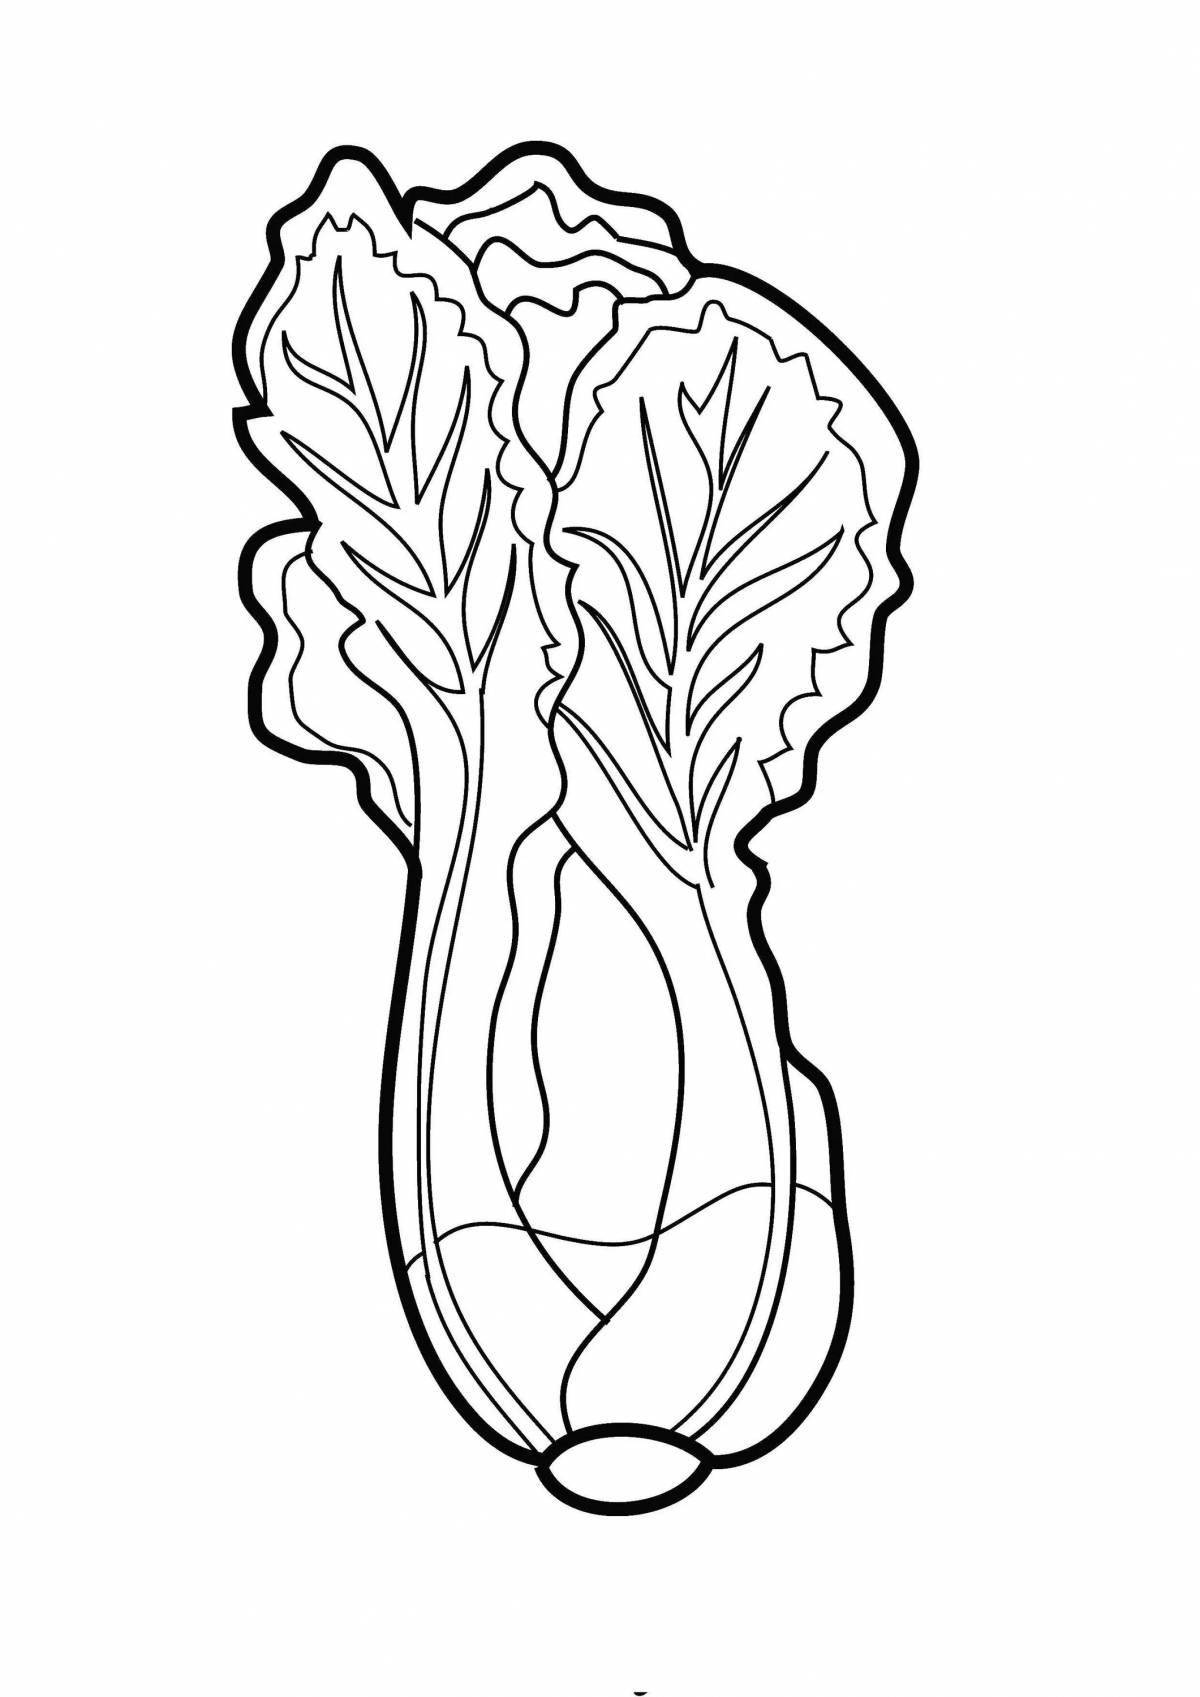 Innovative lettuce coloring page for kids